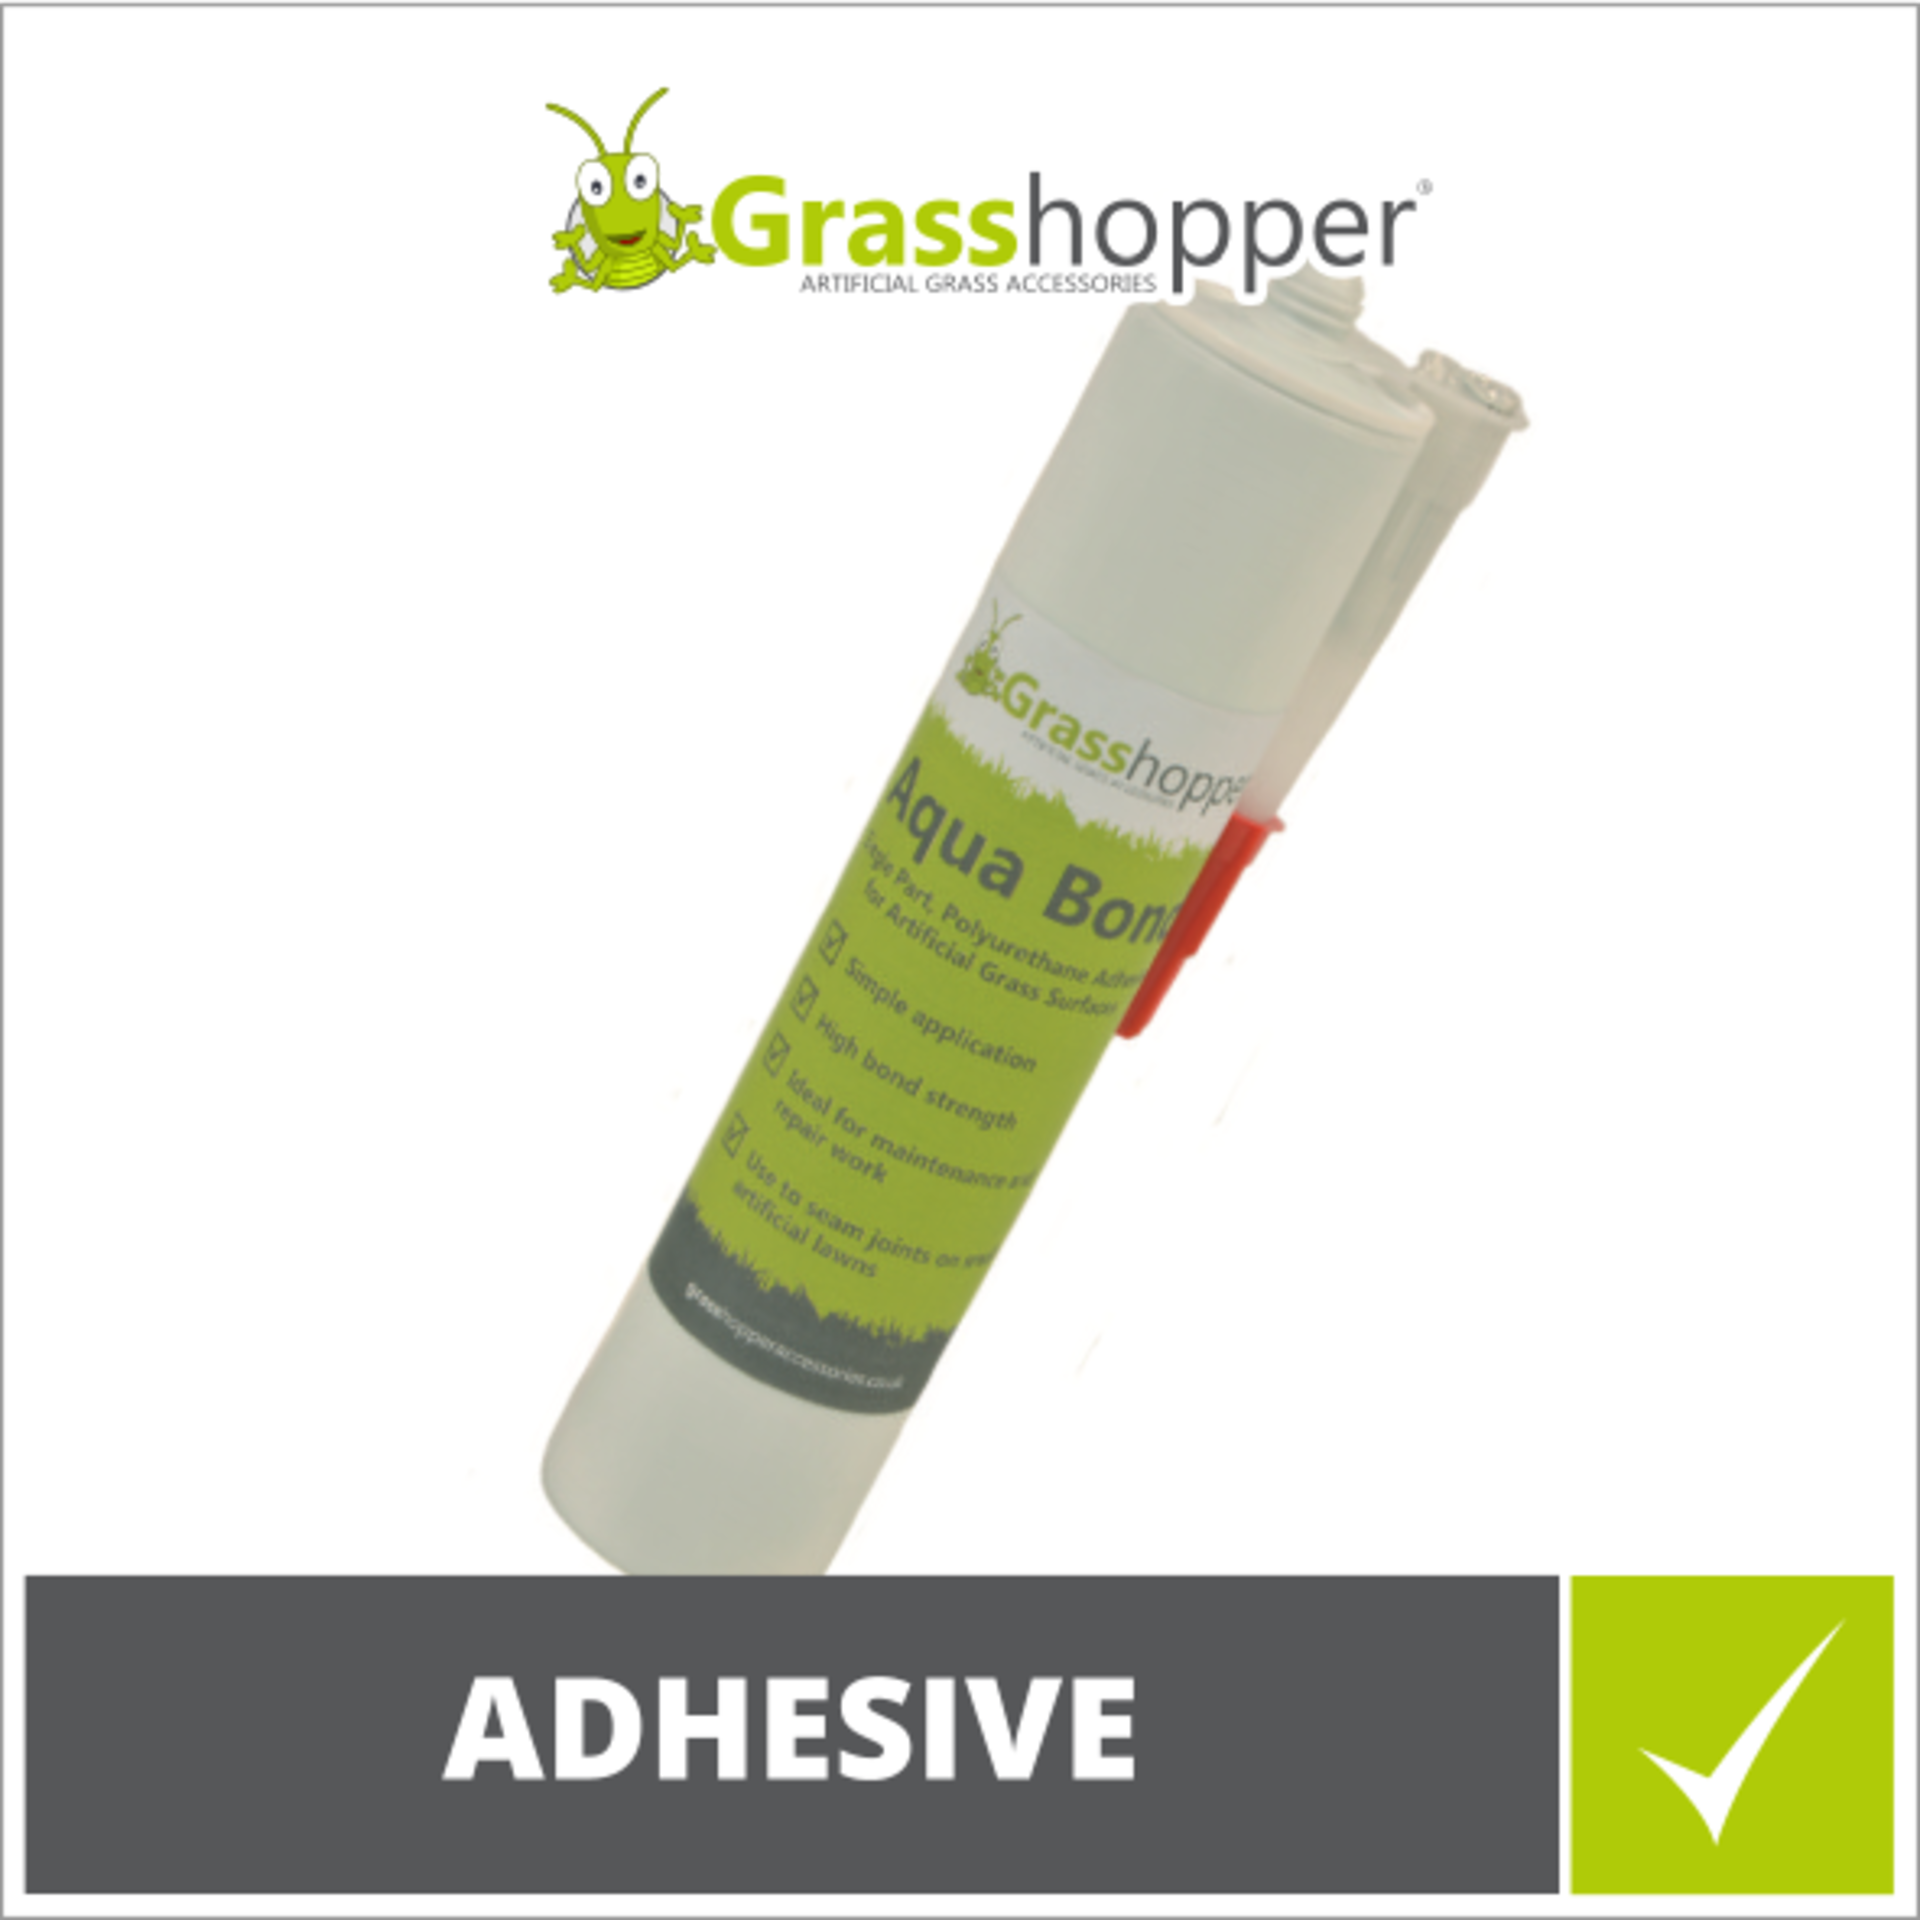 2 x Artificial Grass Adhesive